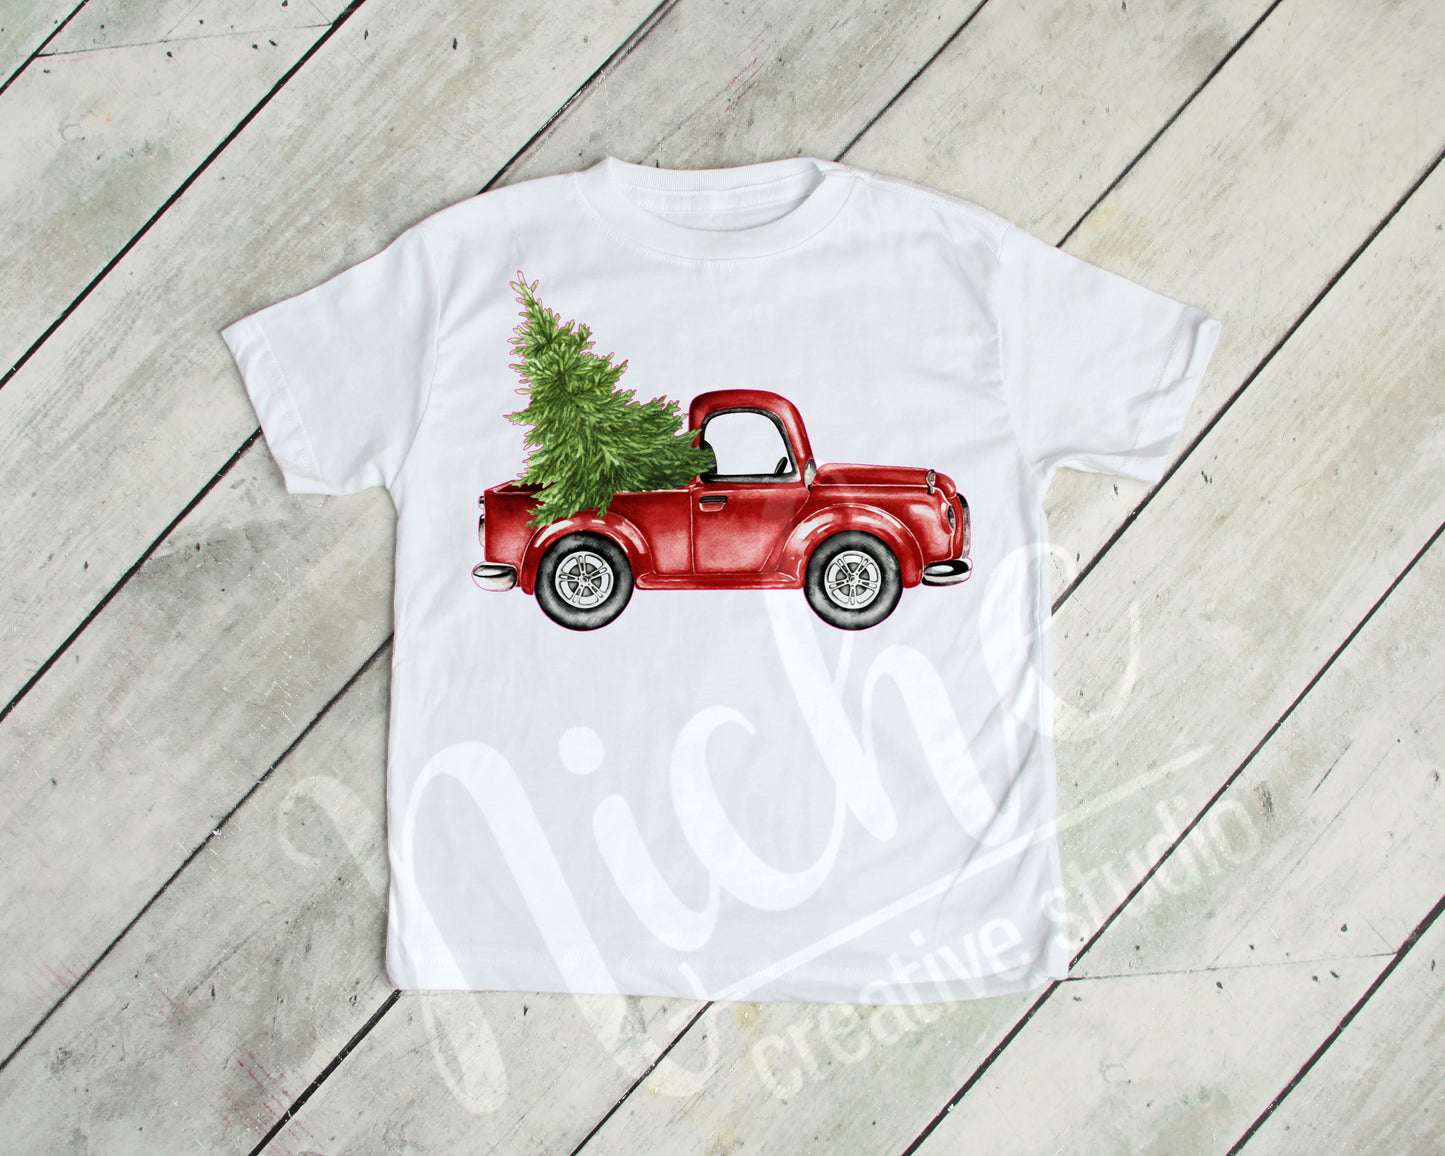 * Red Truck with Tree Decal